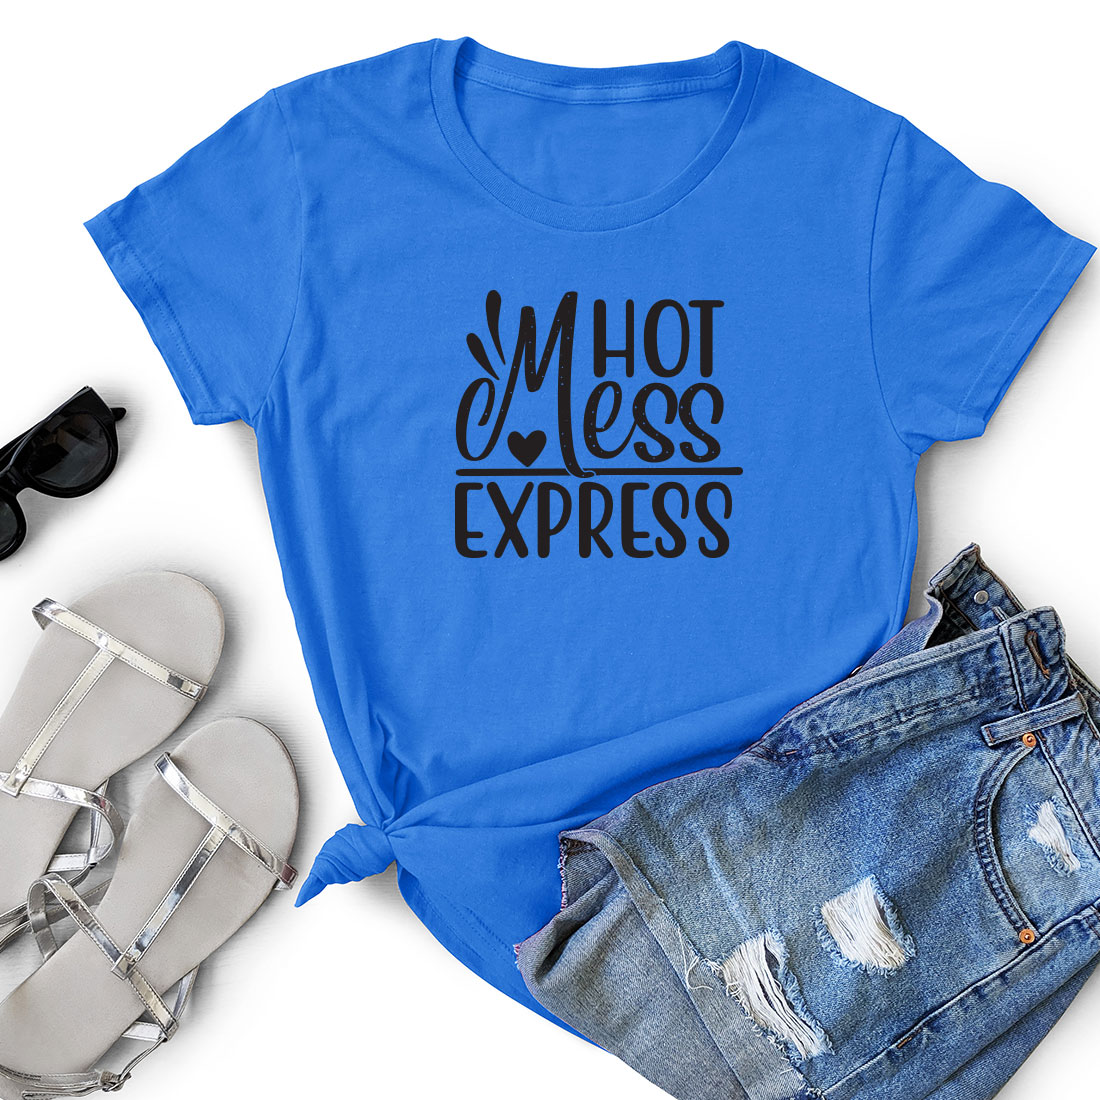 T - shirt with the words hot mess express on it.